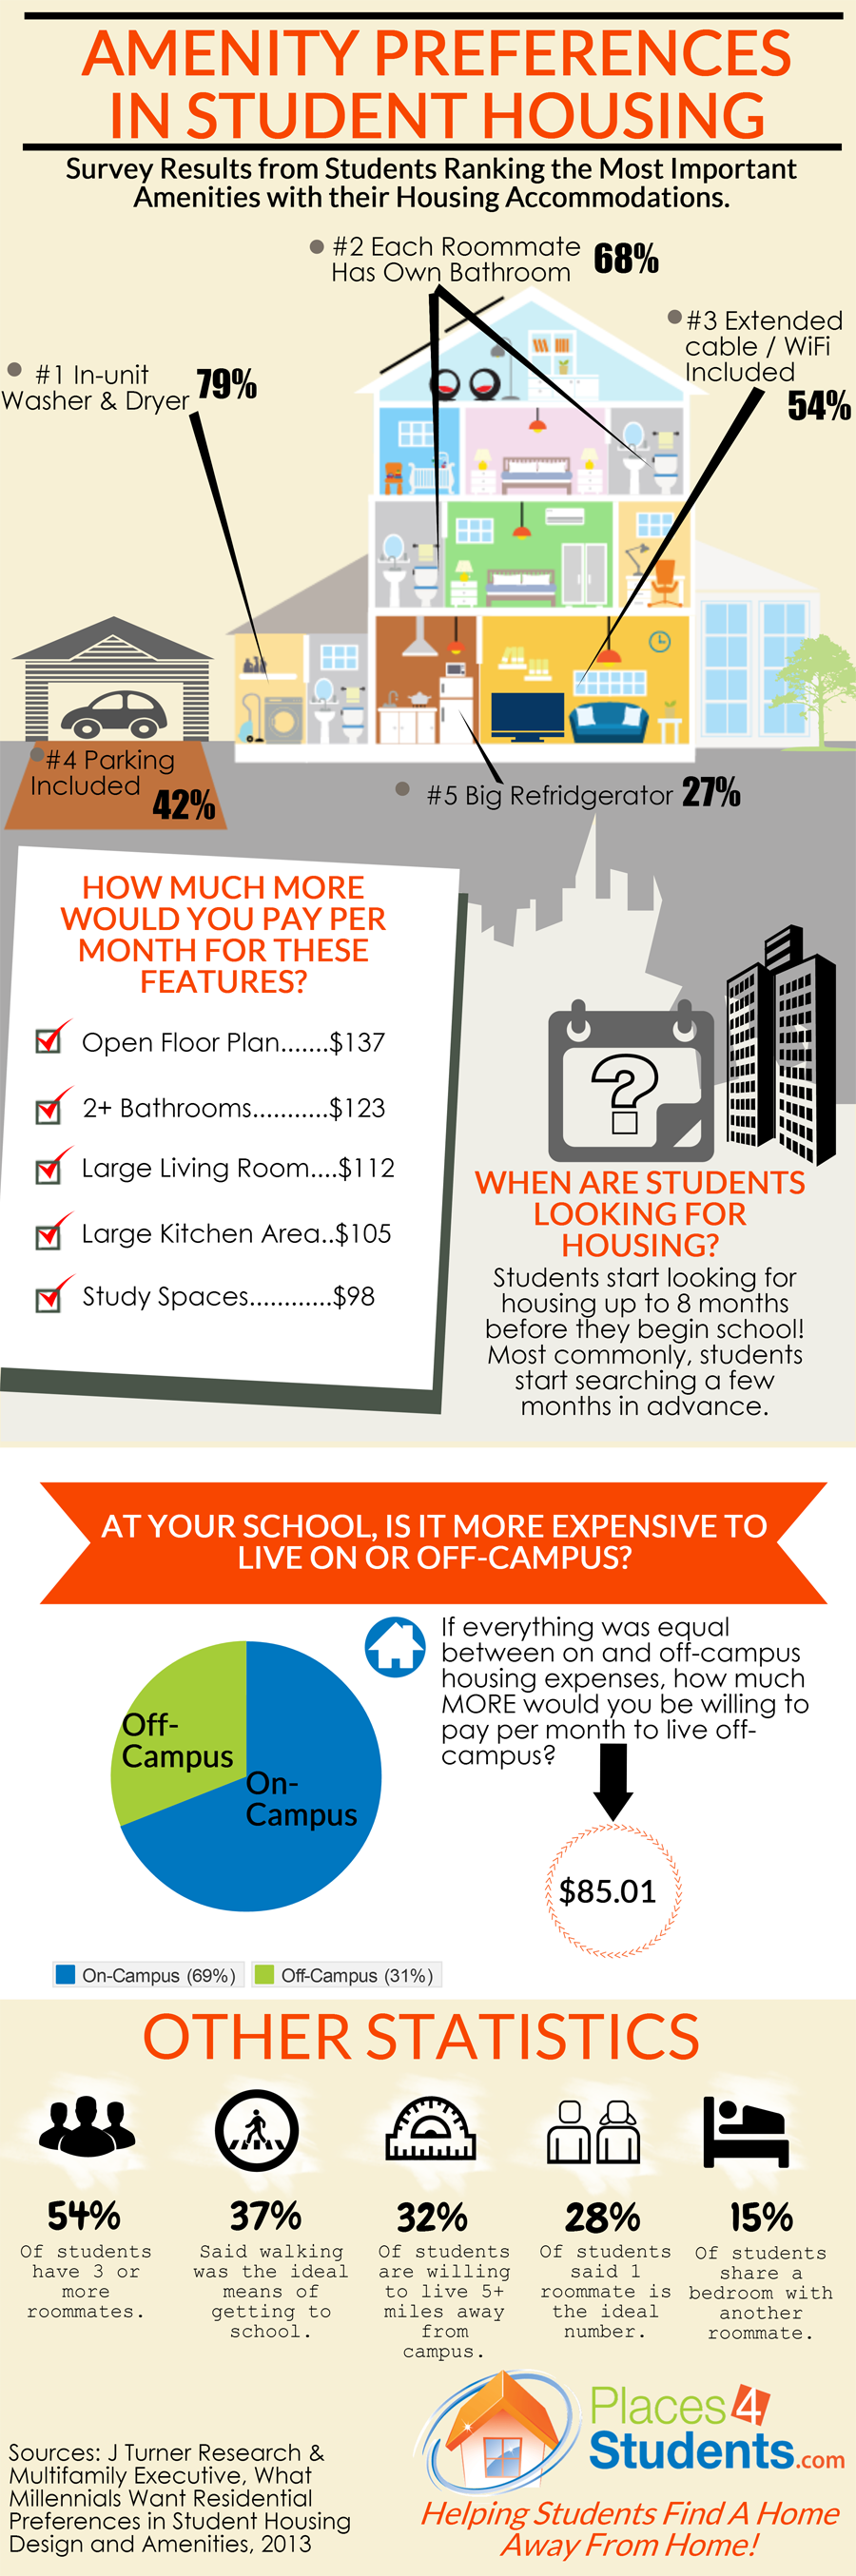 Amenity Preferences in Student Housing